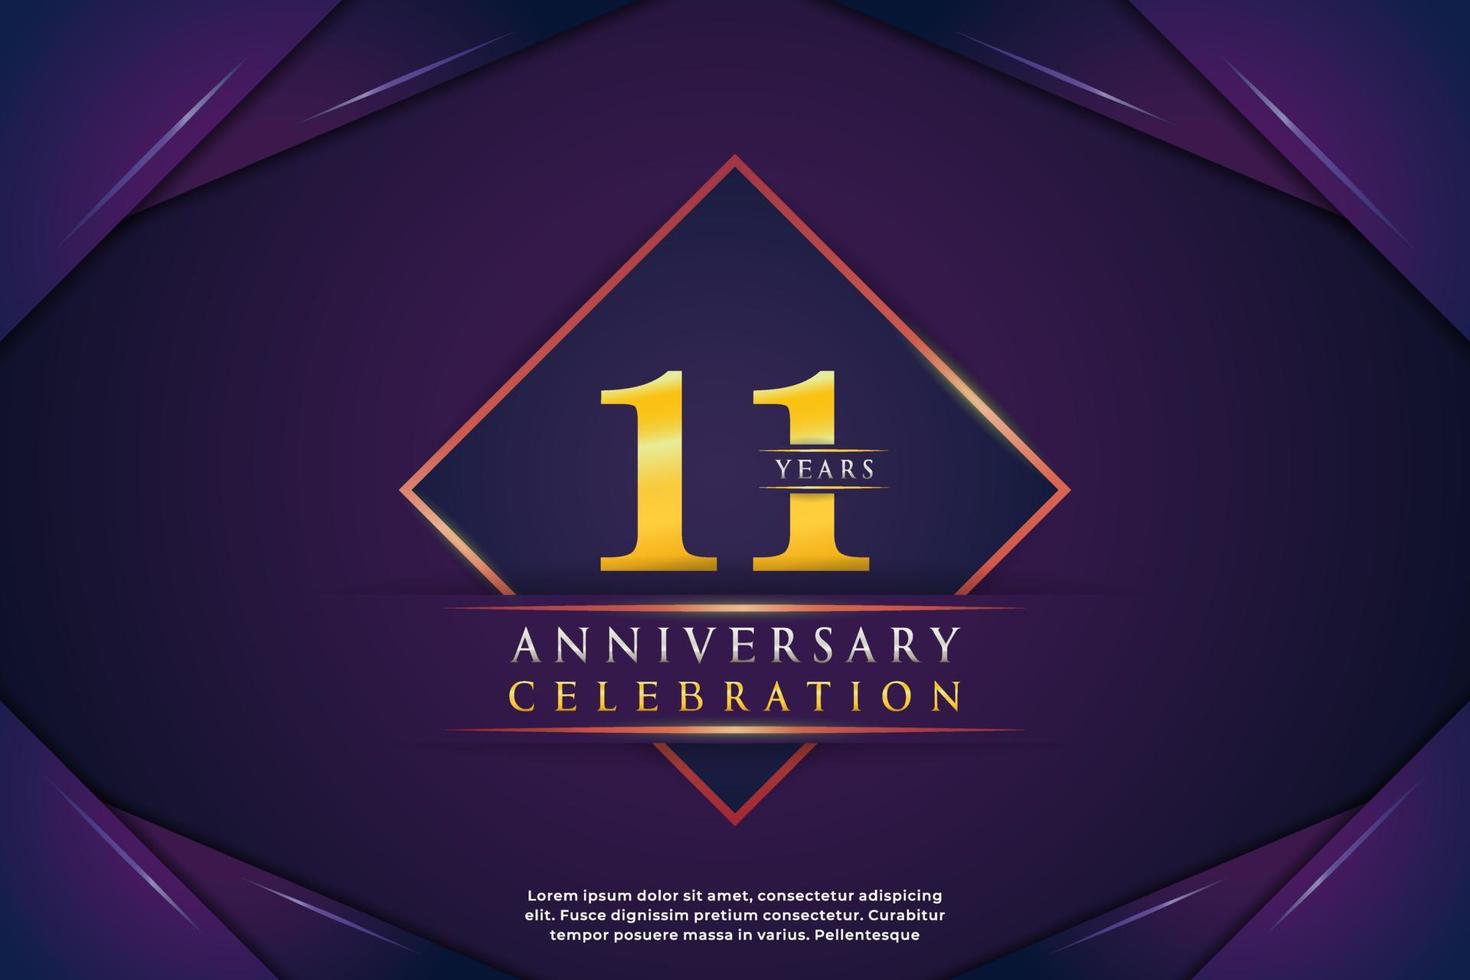 luxury anniversary celebration design for background  banner  birthday or wedding party event decoration vector